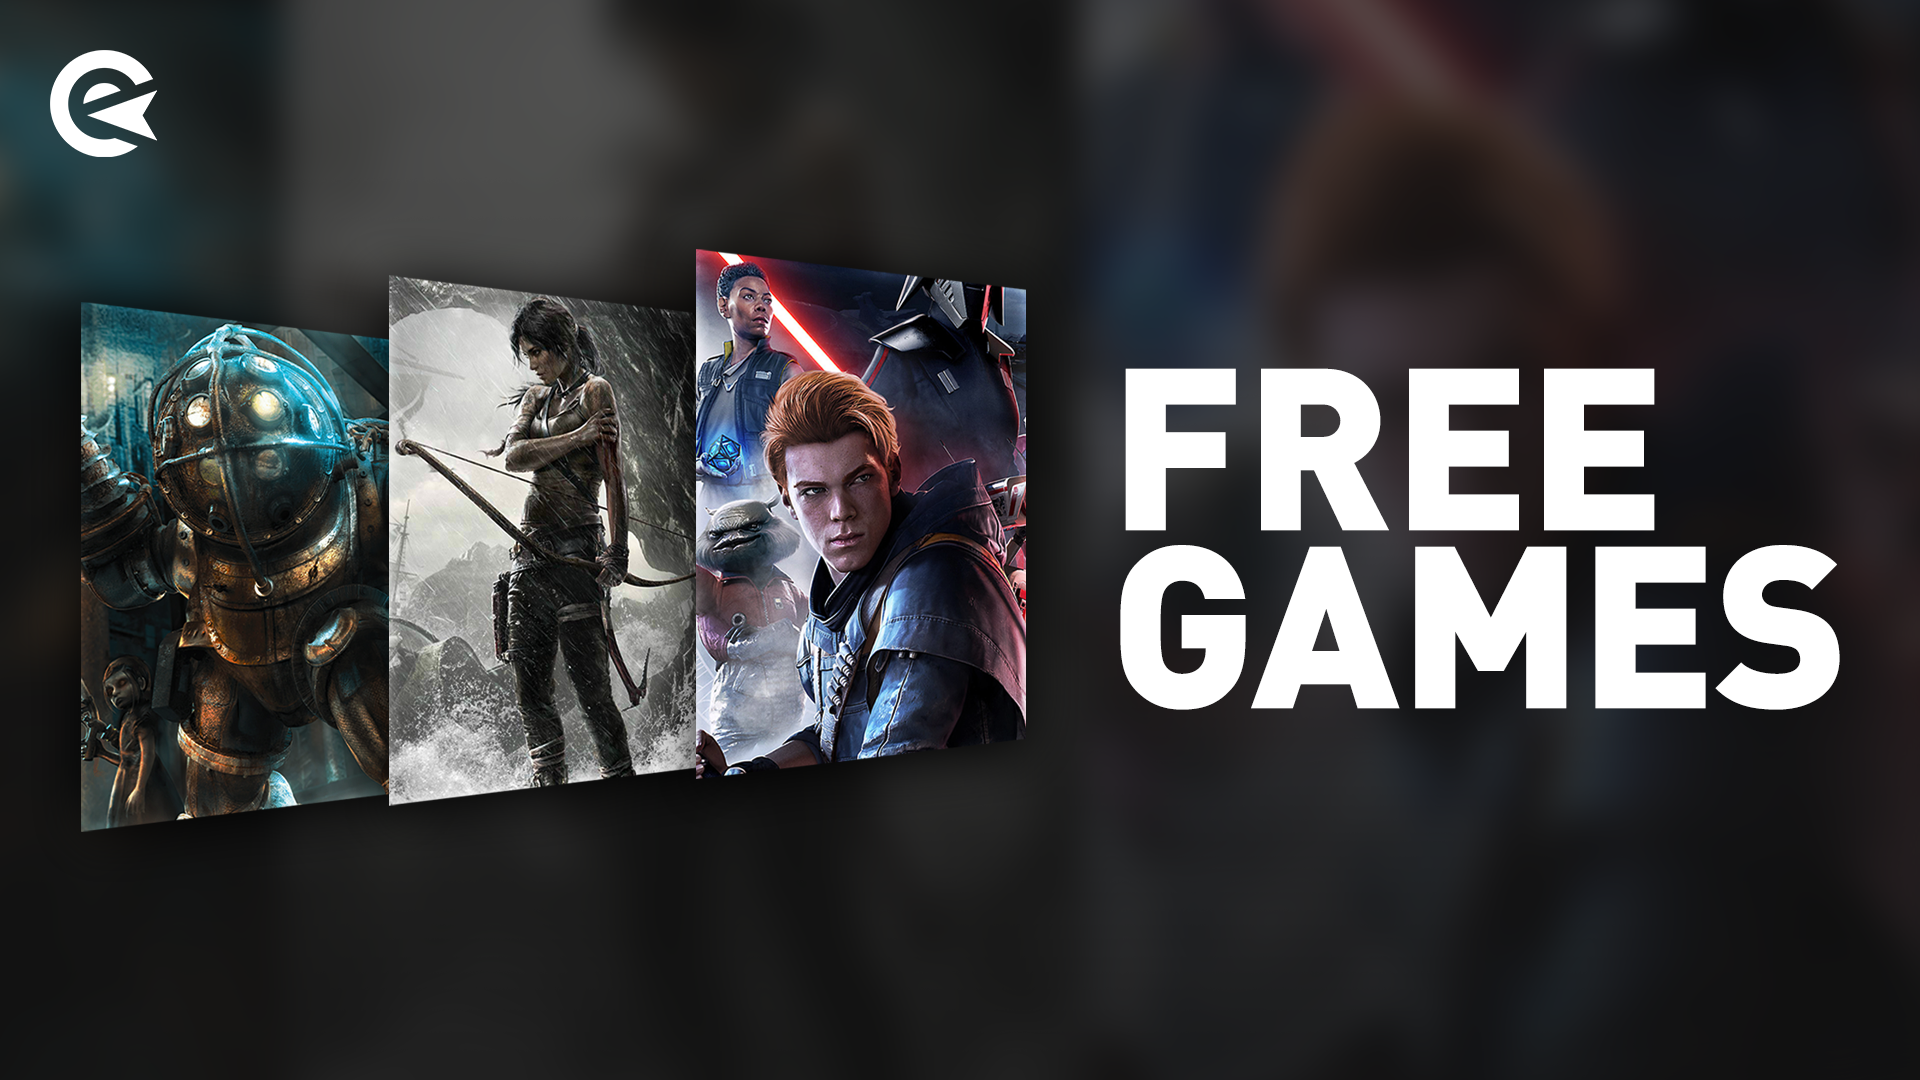 Epic Games Free Game For August 24 Revealed! - HIGH ON CINEMA